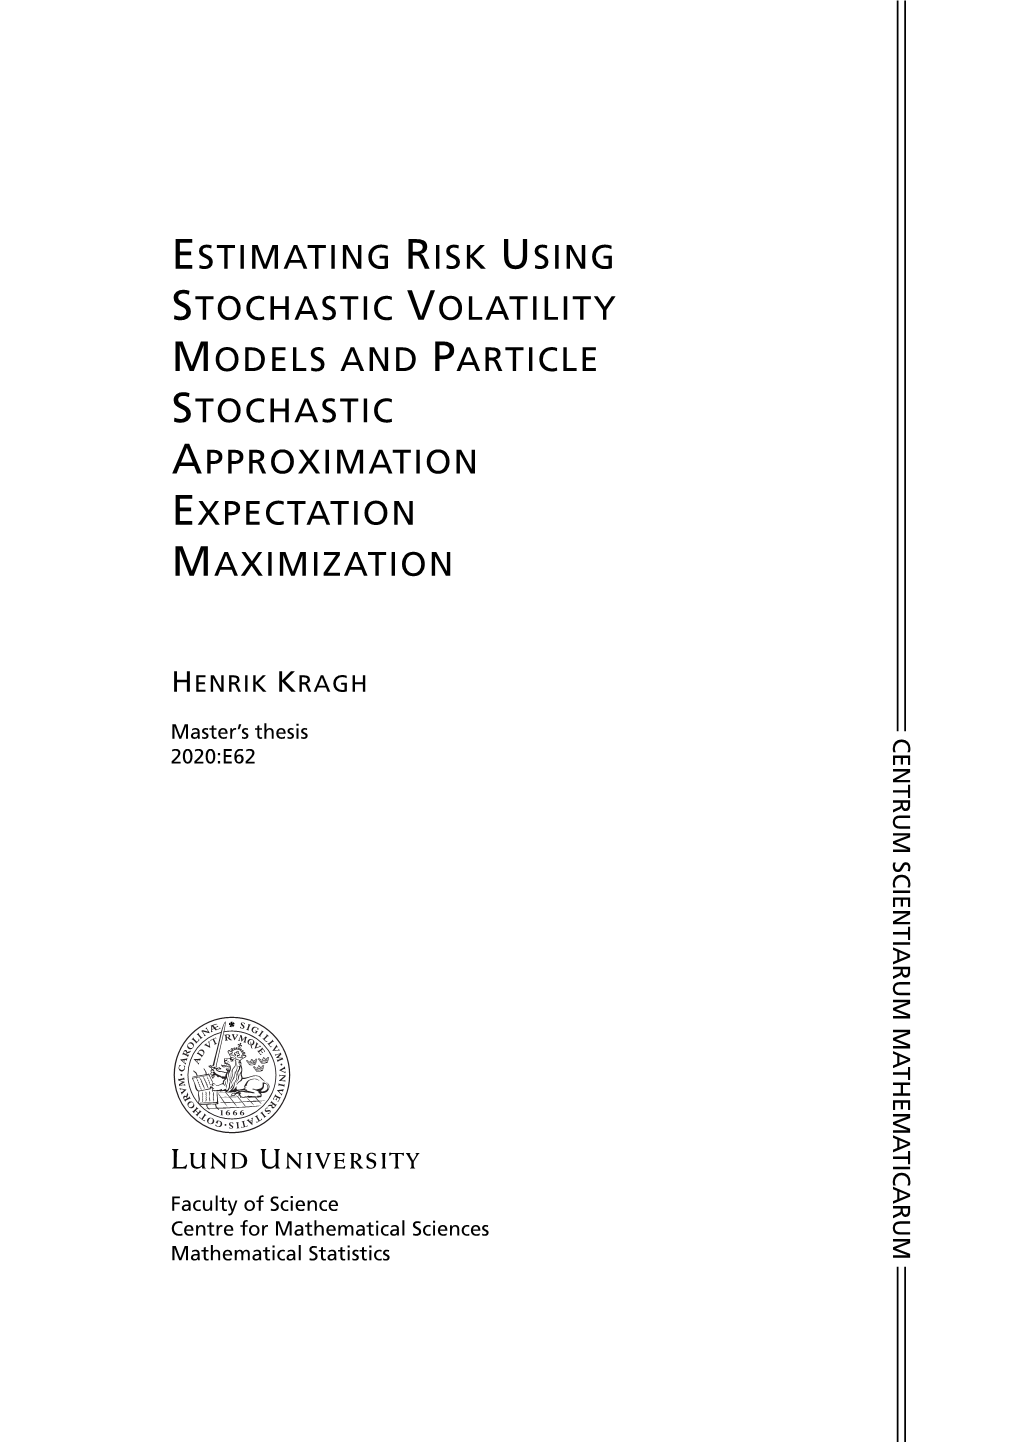 Estimating Risk Using Stochastic Volatility Models and Particle